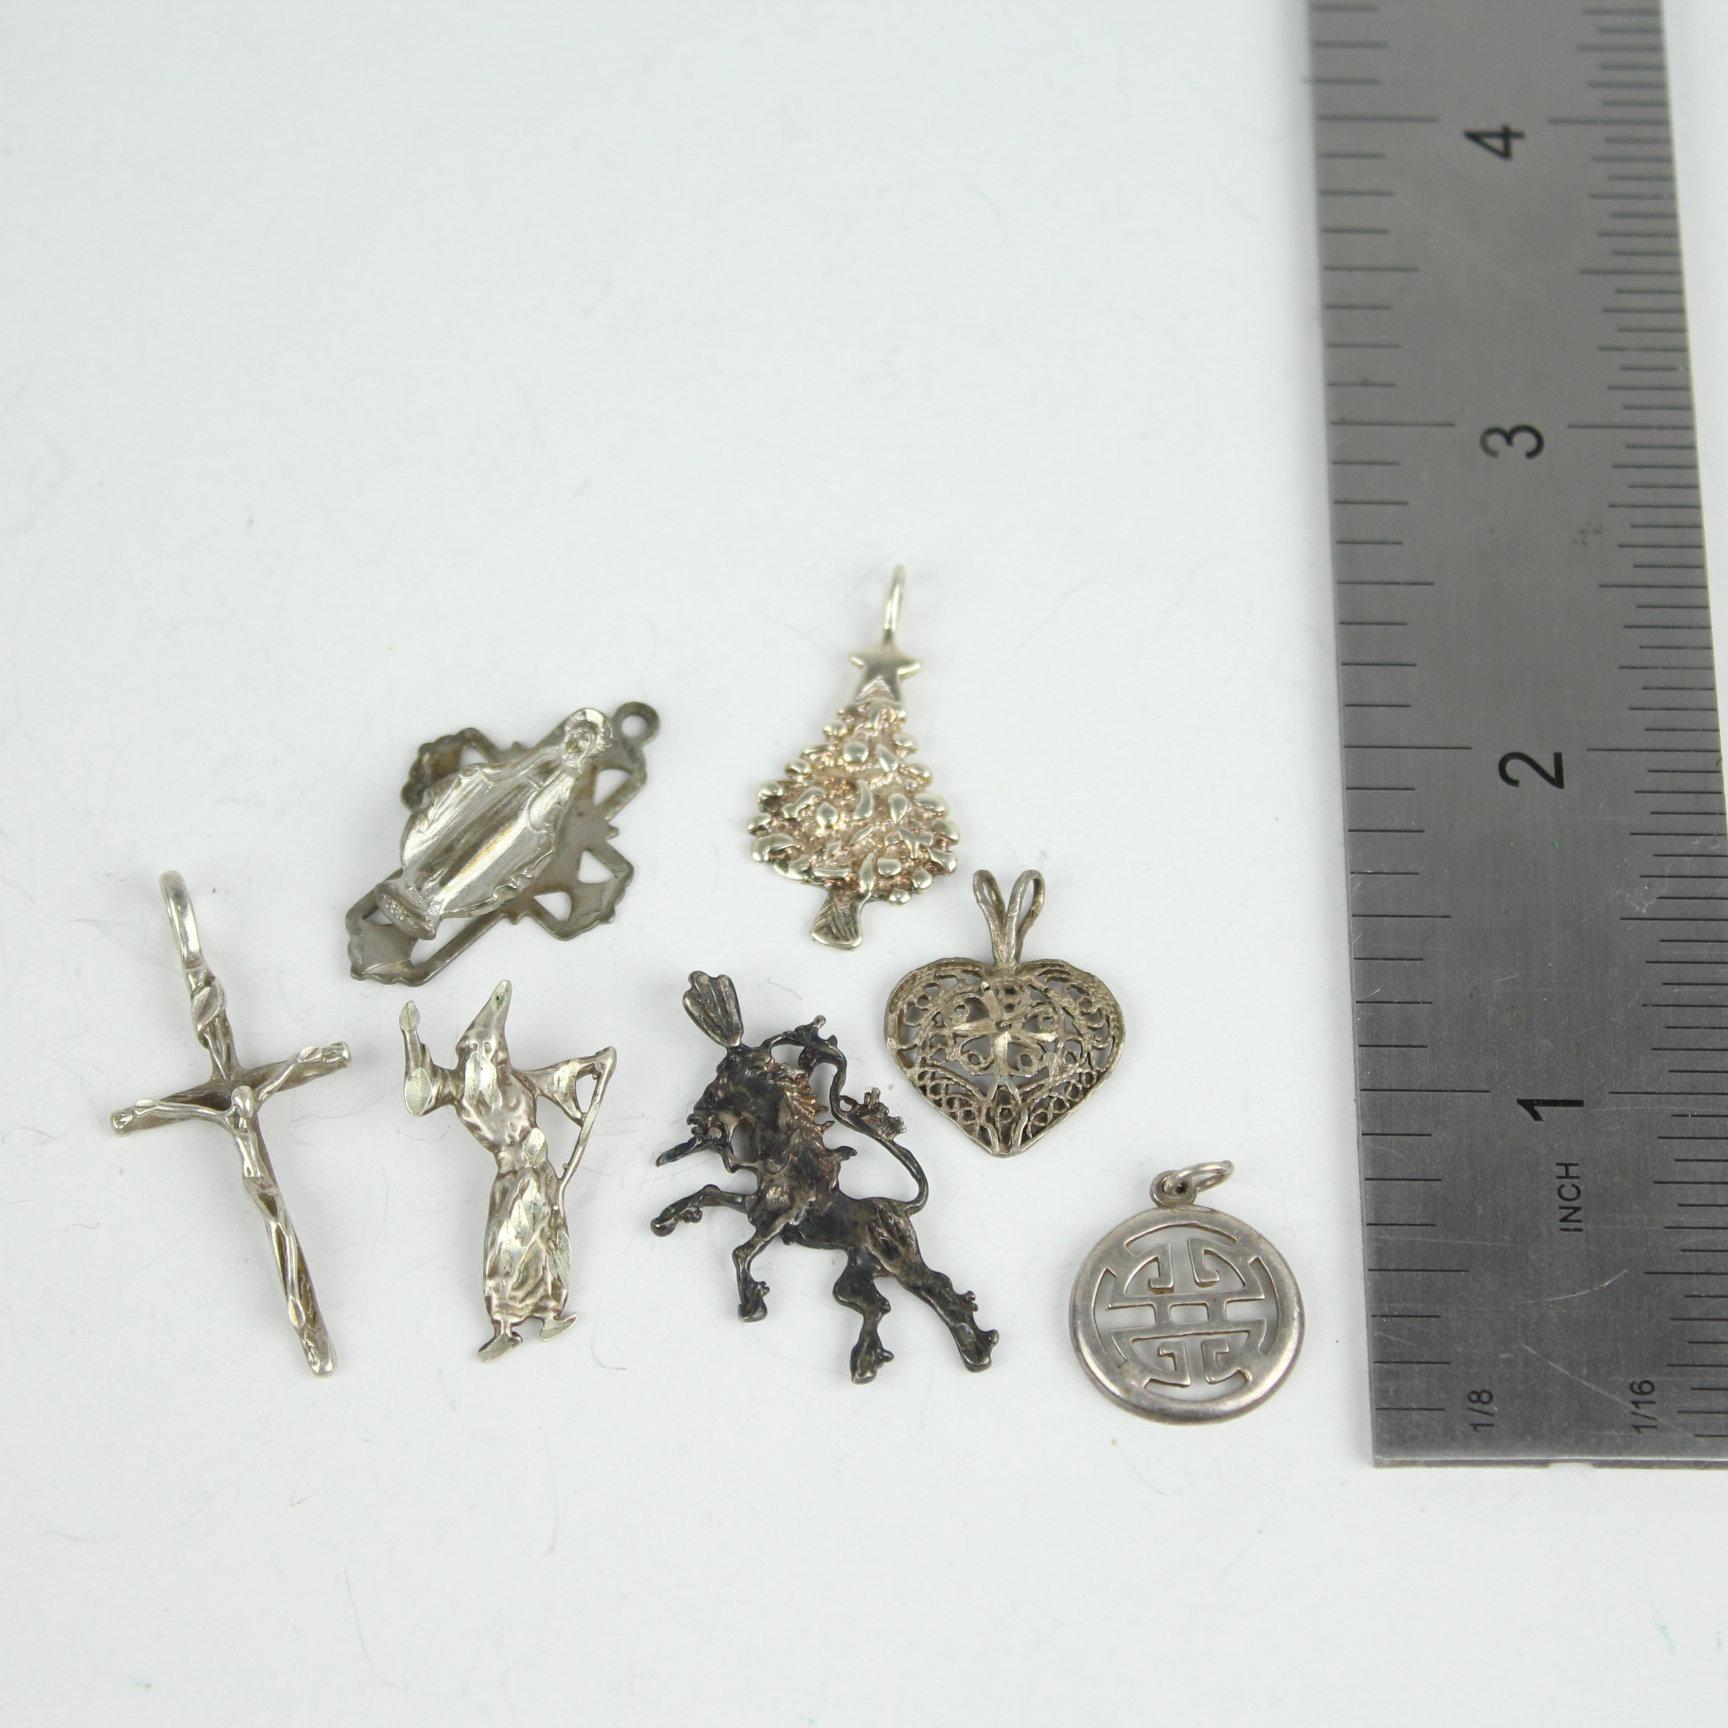 Group of Sterling Silver Charms or Pendants 12 Grams